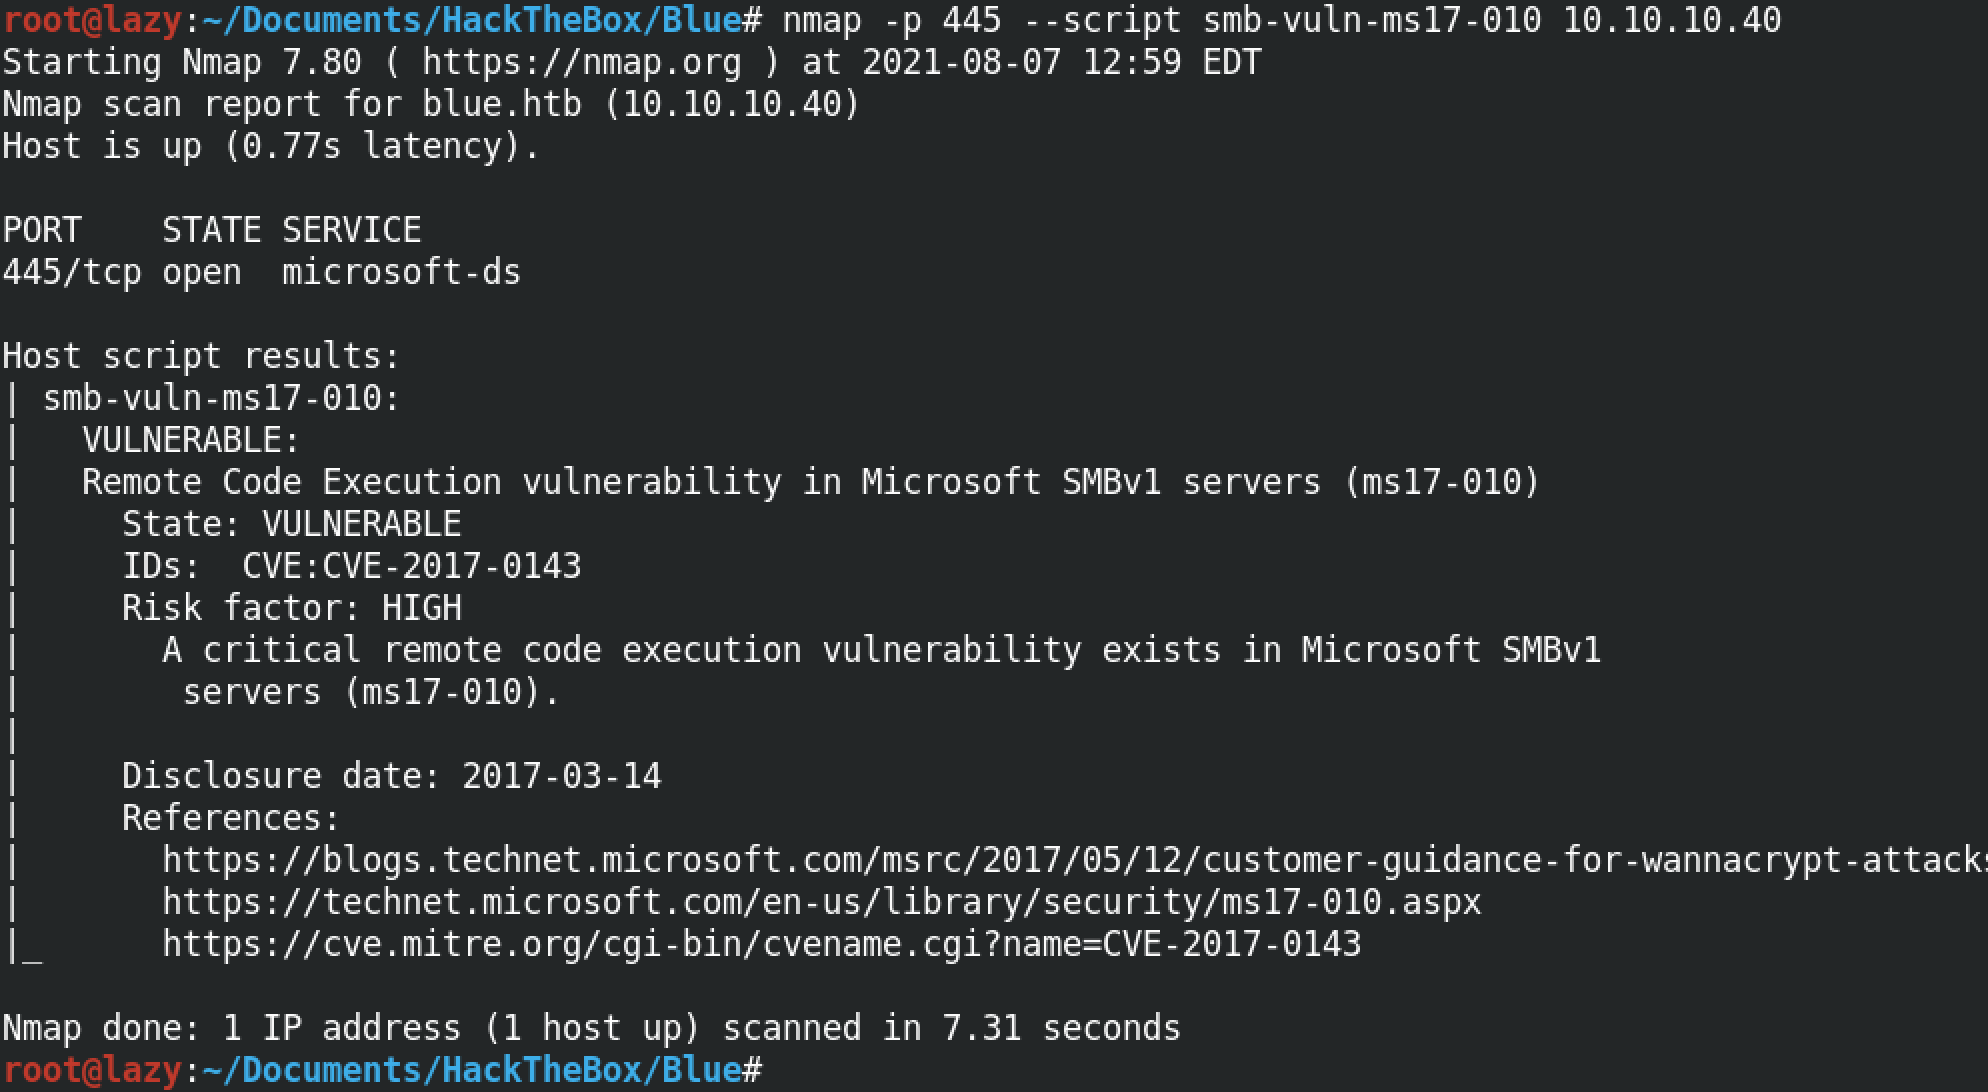 Nmap scan to find ms17-010 vulnerability.